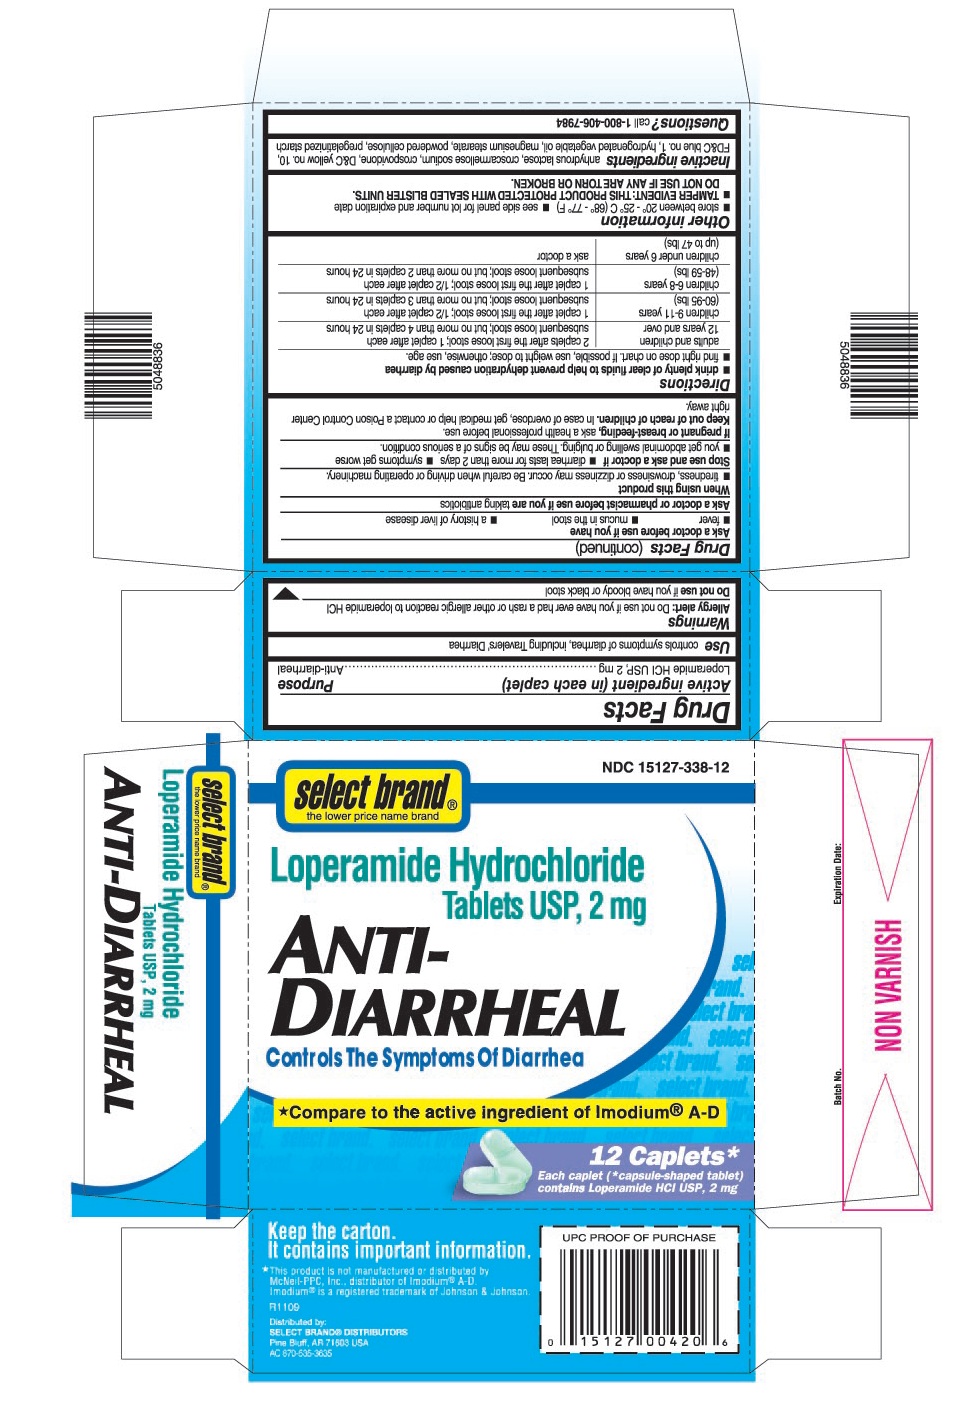 This is the 12 count blister carton label for Select Brand Loperamide HCl tablets USP, 2 mg.